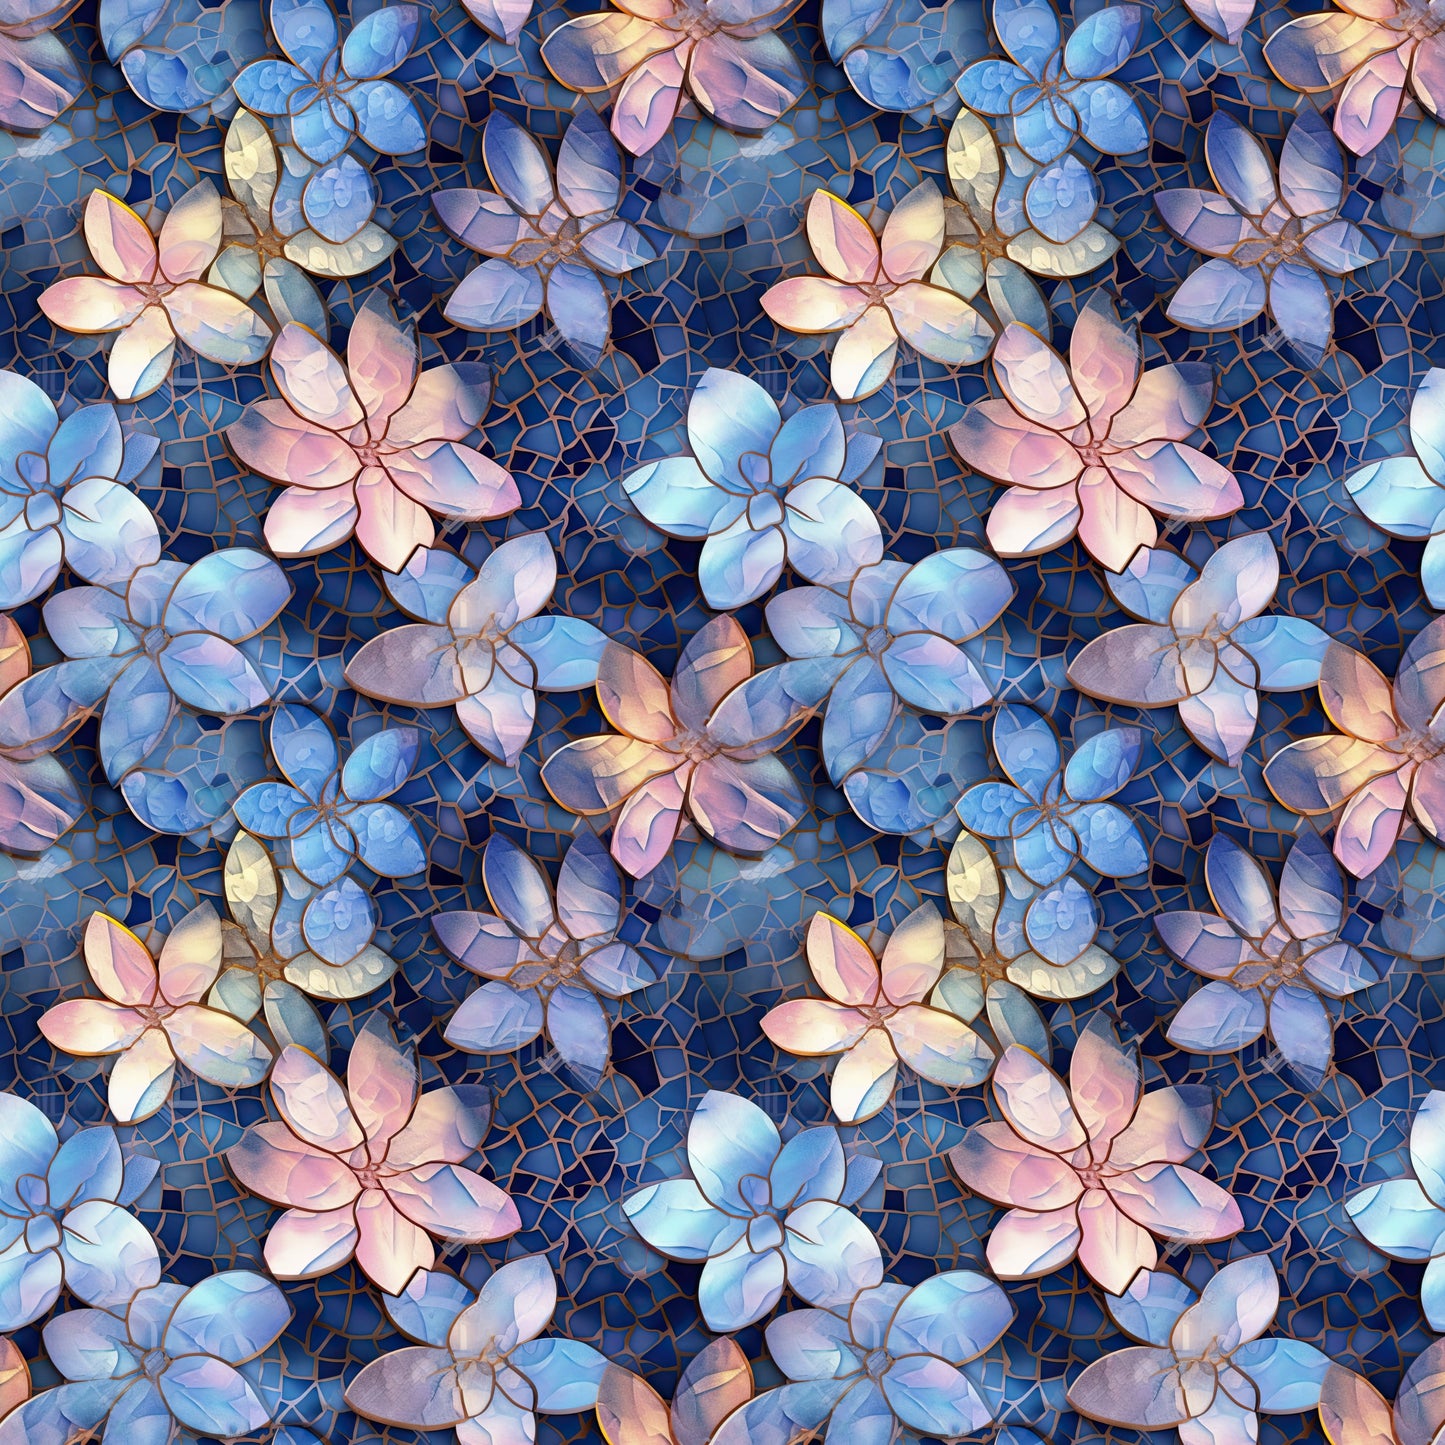 Mosaic in Blue and Pink Velvet